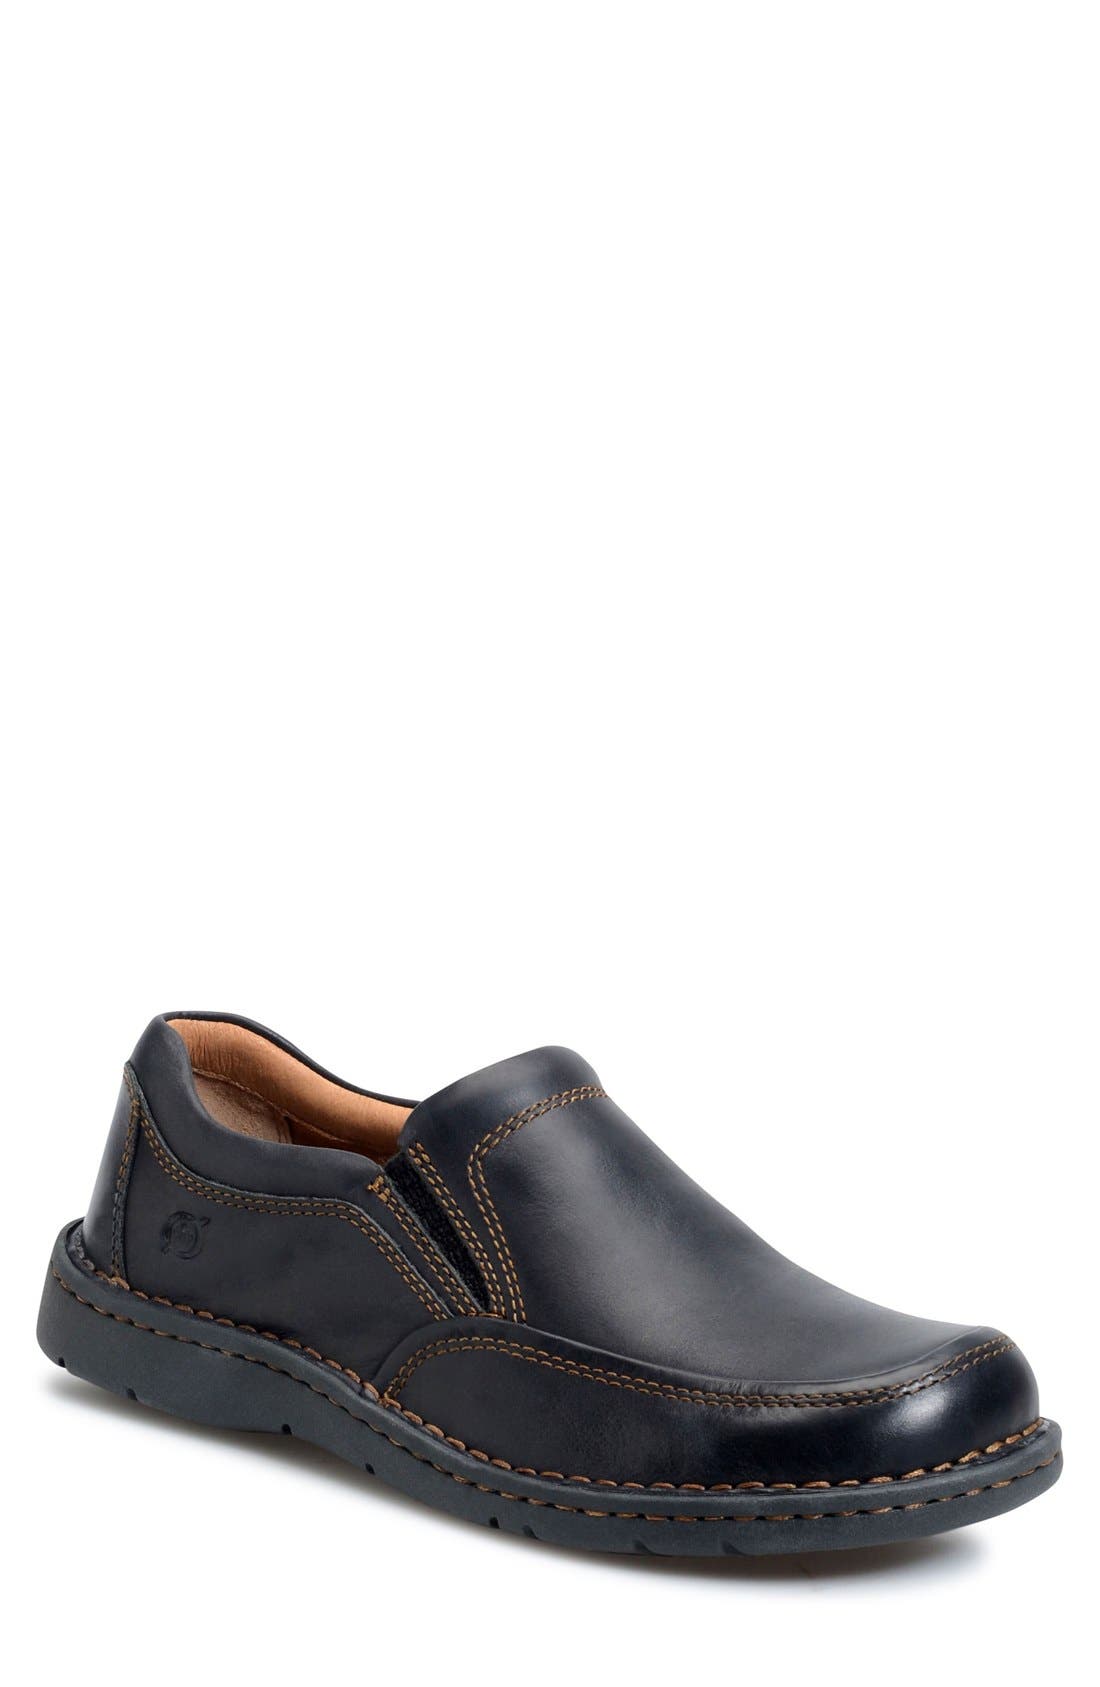 born leather slip on shoes